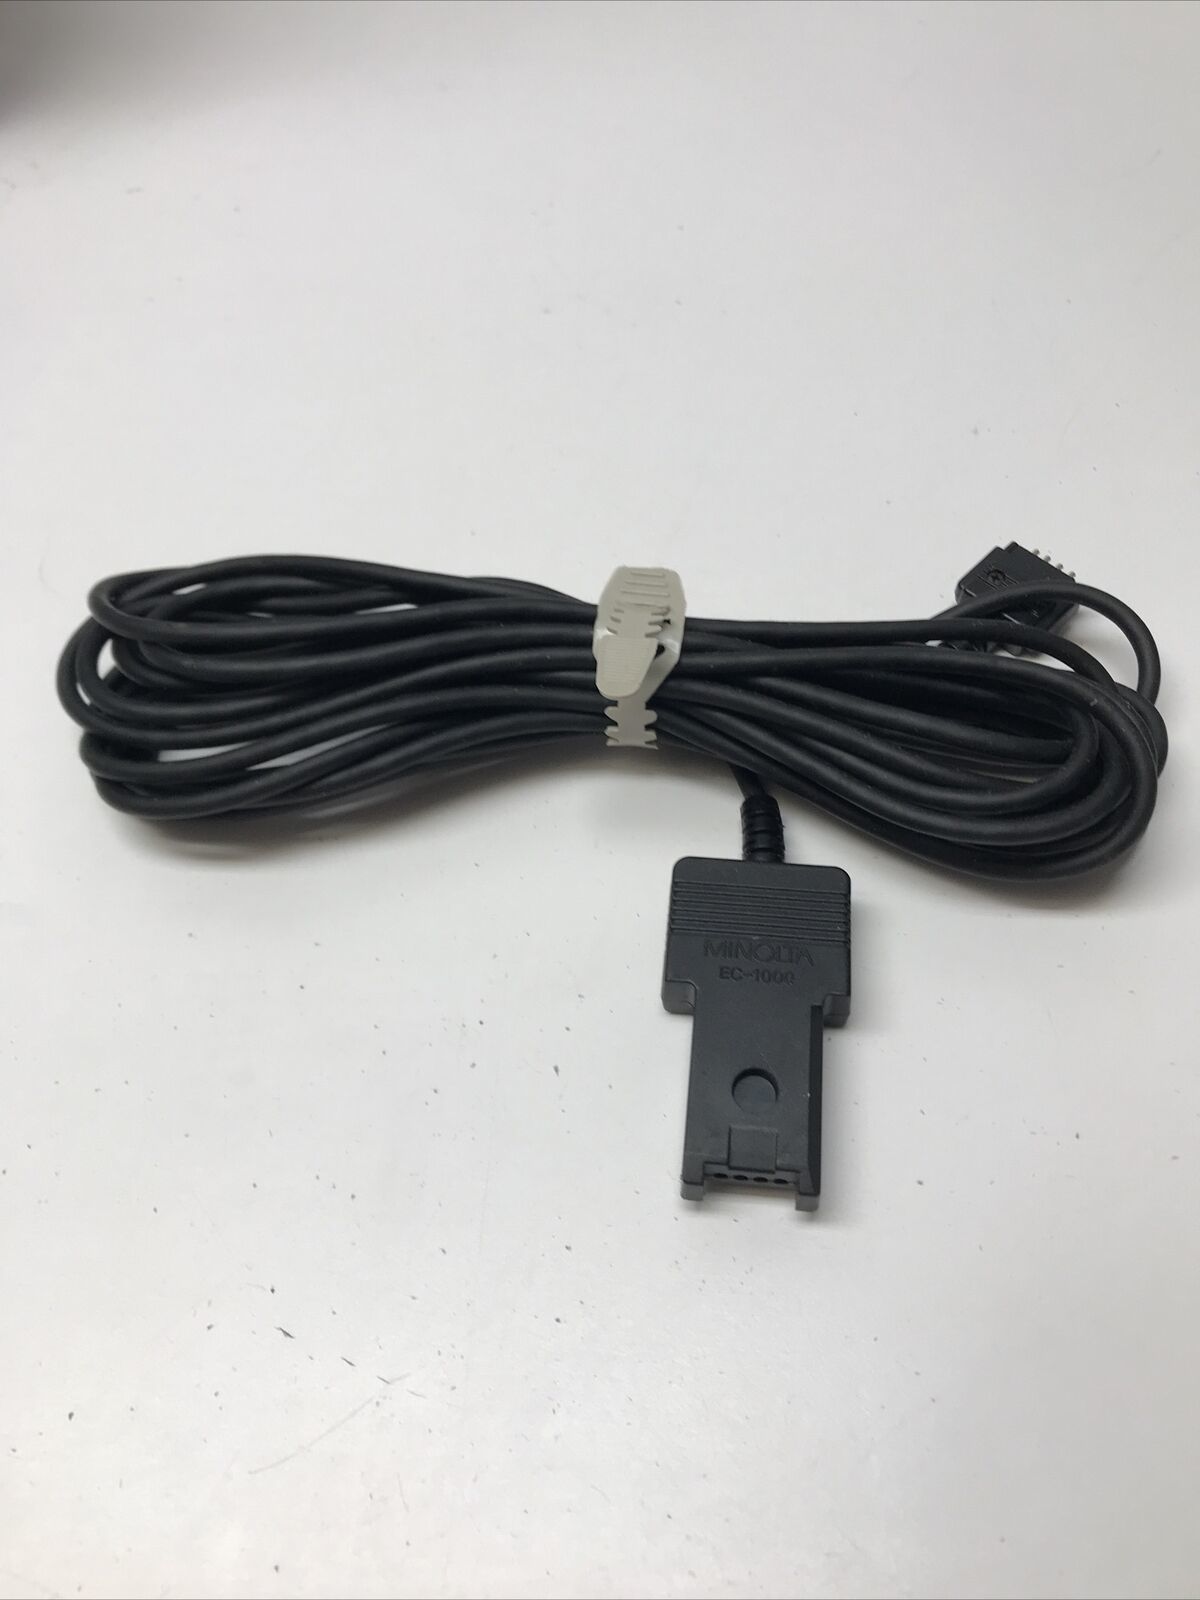 Primary image for Minolta EC-1000 Grip Extension Cable for Flash KG Camera Photos Photography